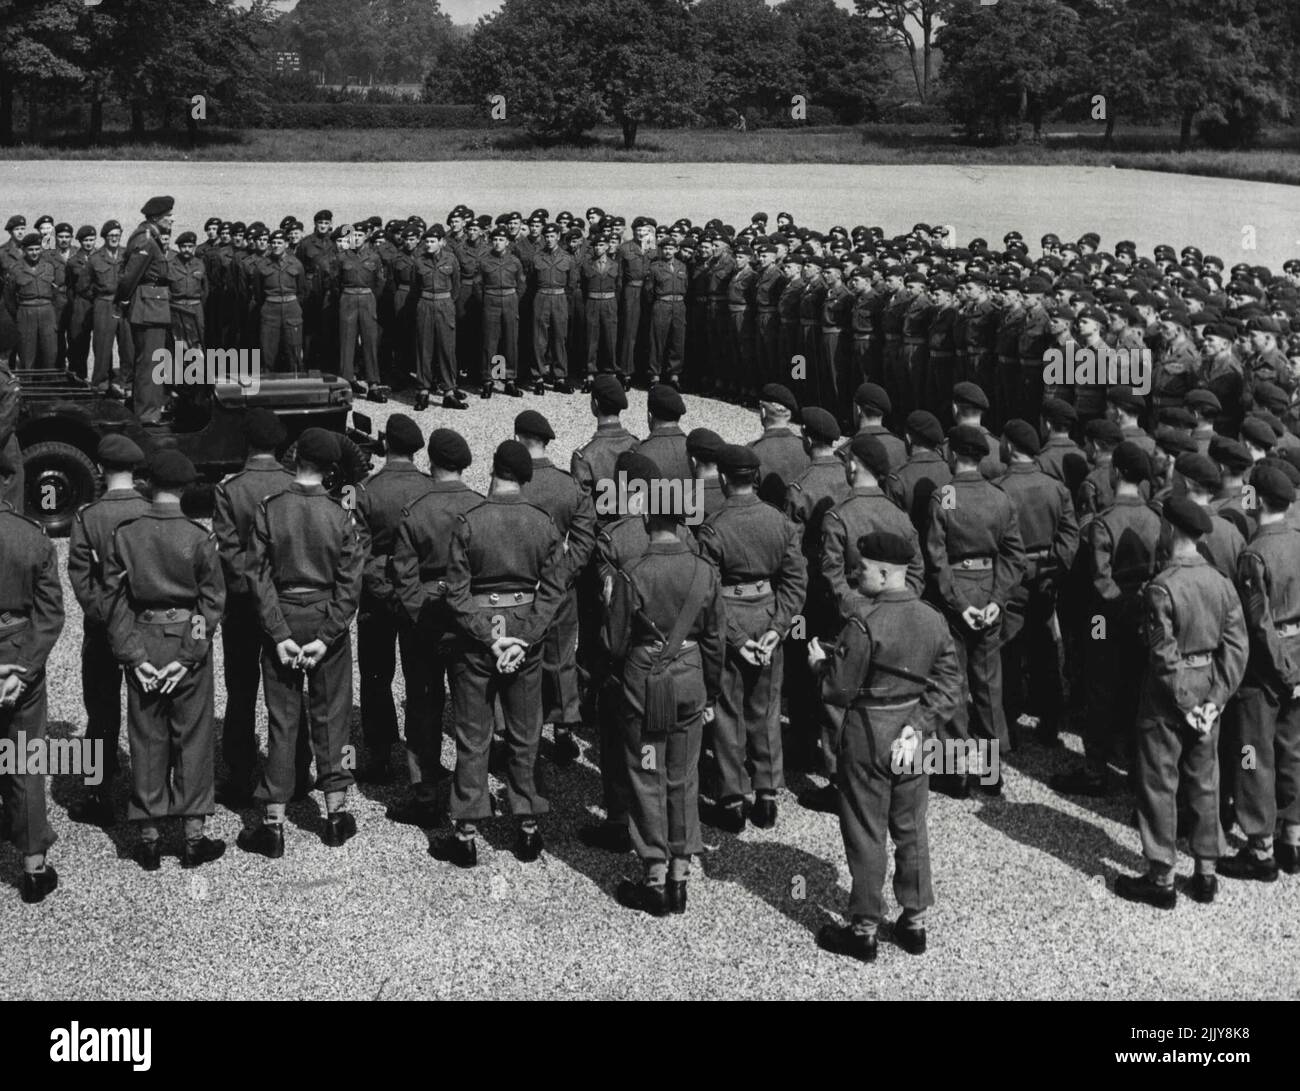 arachute regiment, is seen standing in a jeep on the parade ground at Albuhera Barracks, Aldershot, addressing officers and men of the 16th. Independent Parachute Bridge, June 3. Tomorrow, the brigade leaves for Cyprus. A small number of soldiers in the right place is better than a large number in the wrong place, he told them when referring to the east as a trouble spot. The field-marshal also informed the men that the king had approved of a Motto for the parachute regiment. The new Motto is 'Utrinque Paratus' which means 'Ready for anything'. July 12, 1951. (Photo by Associated Press Photo). Stock Photo